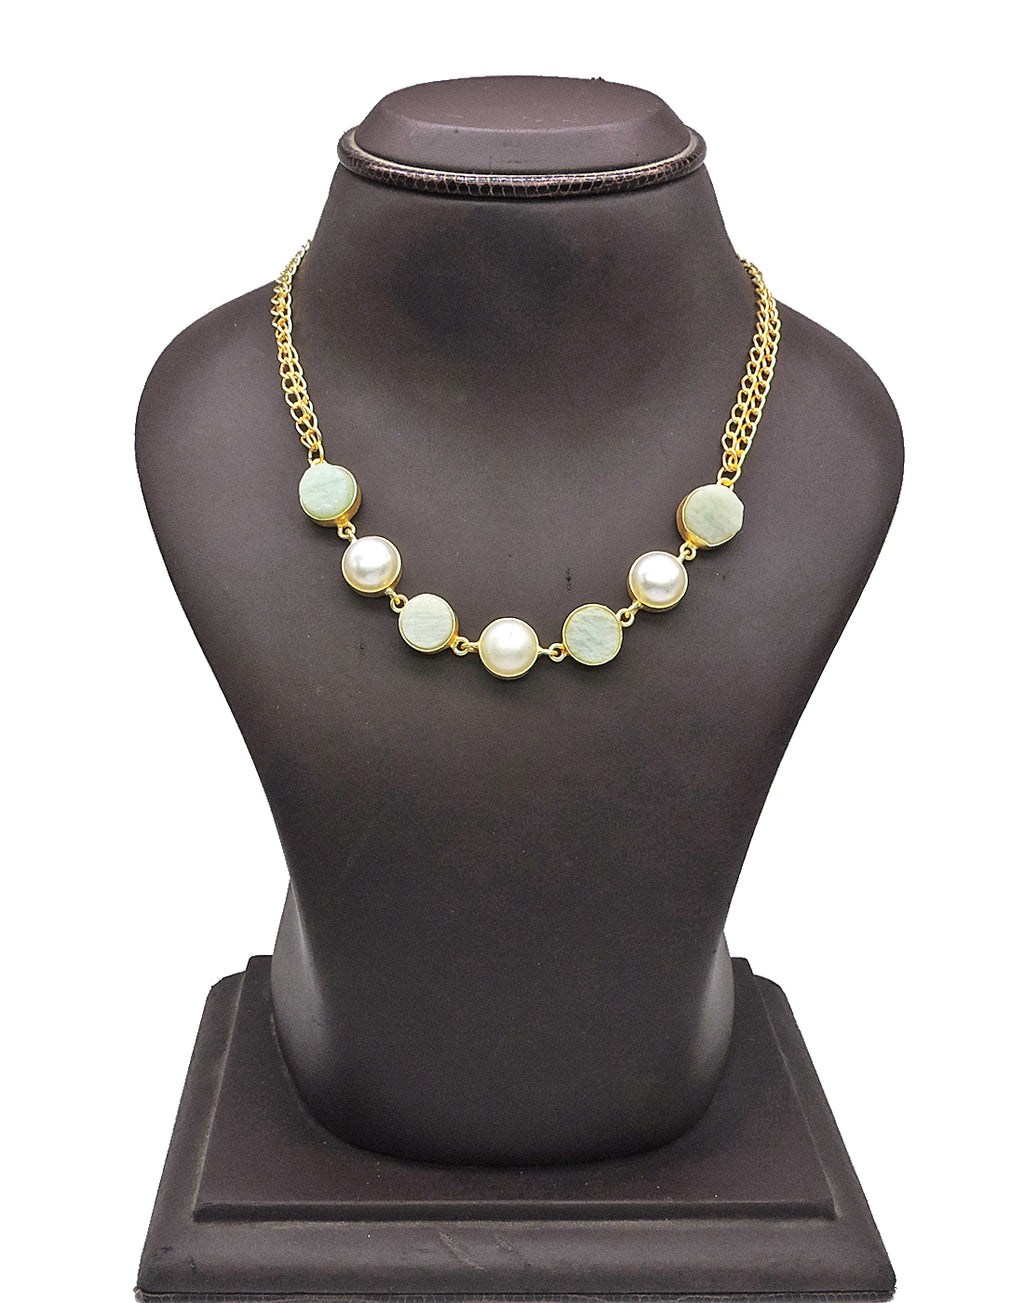 Amazonite & Pearl Necklace - Statement Necklaces - Gold-Plated & Hypoallergenic Jewellery - Made in India - Dubai Jewellery - Dori